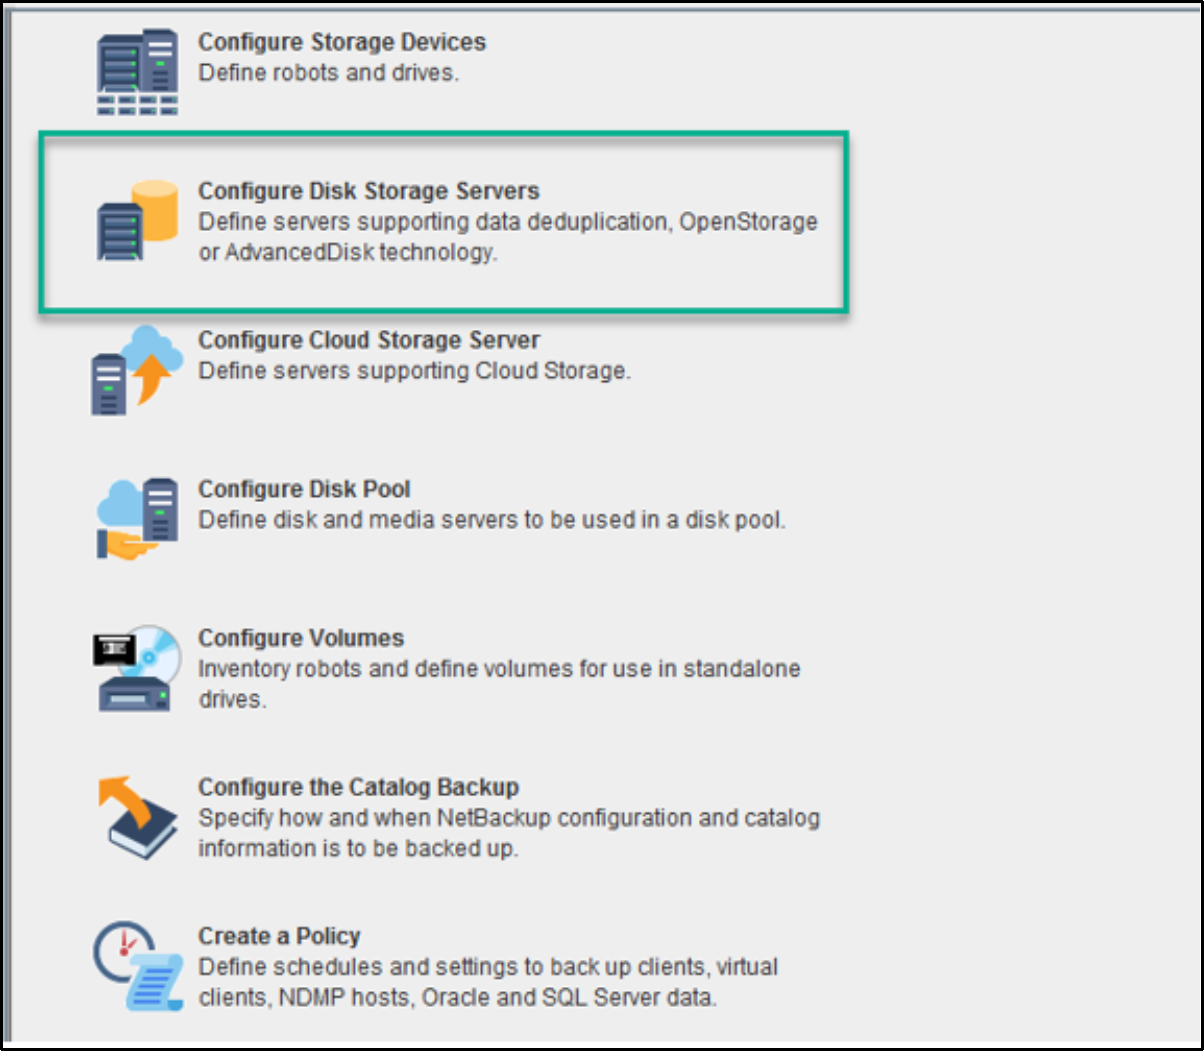 This image shows the option to Configure Disk Storage Servers from NetBackup Console.